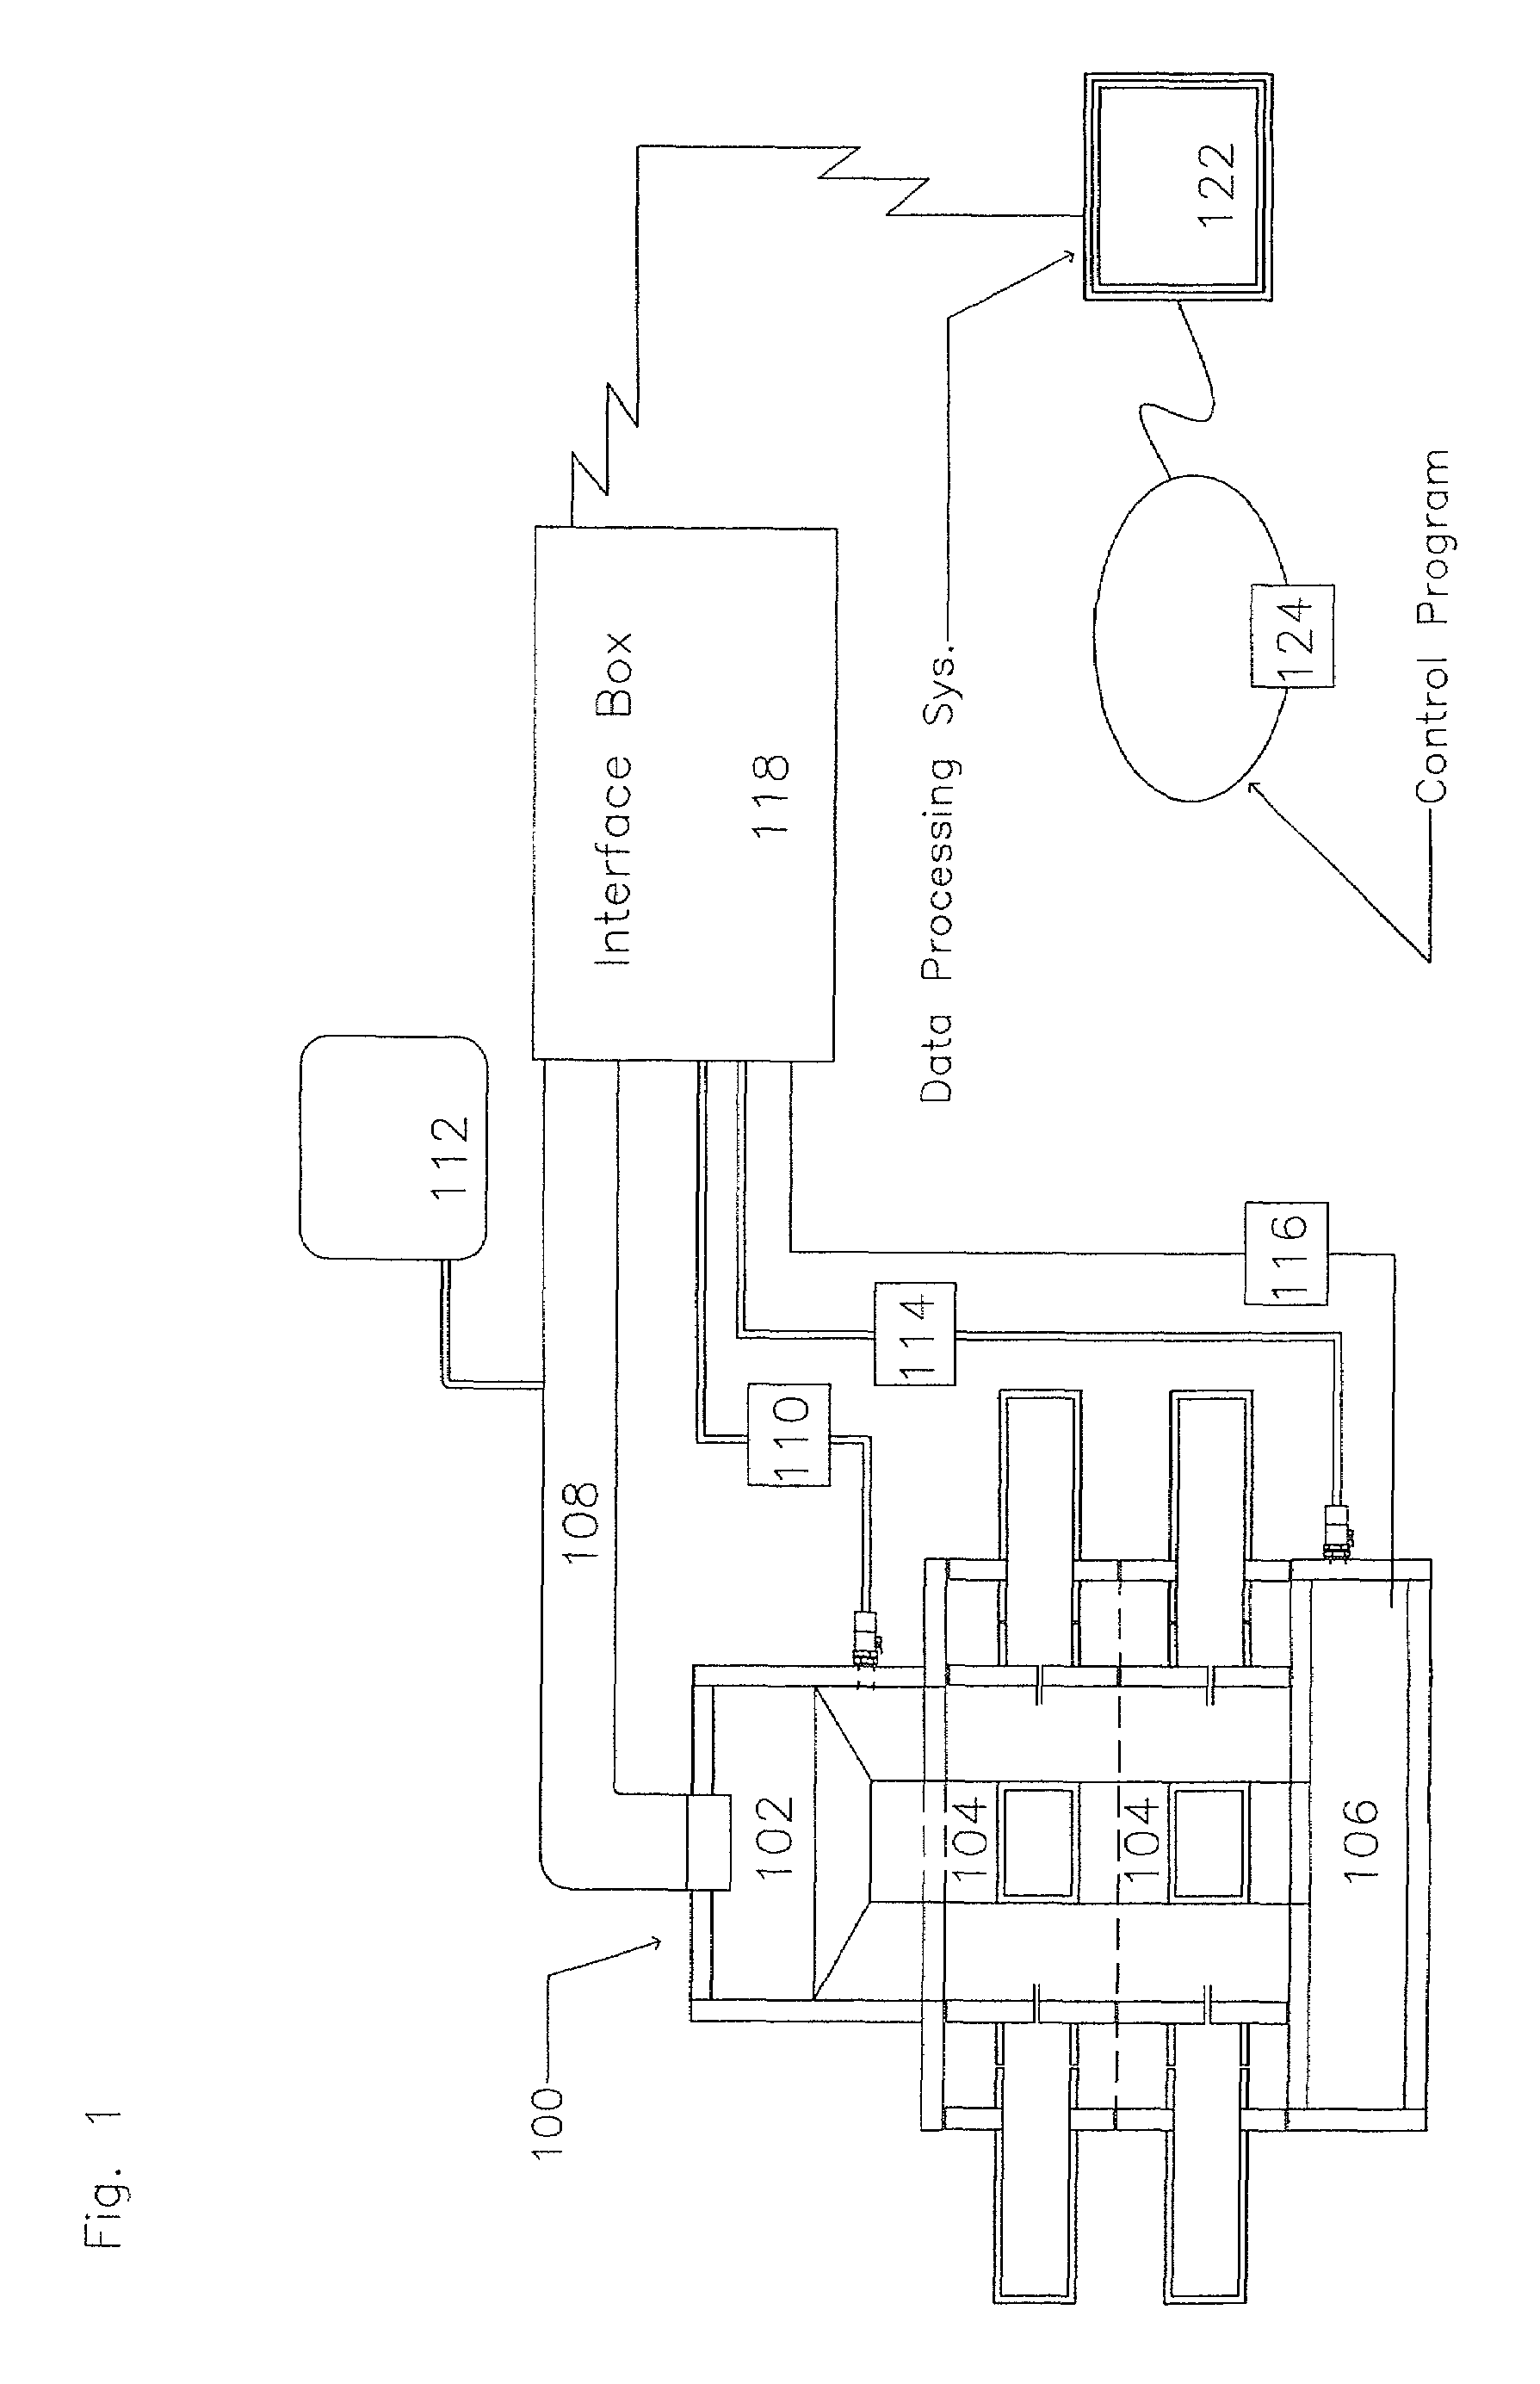 Automated inhalation toxicology exposure system and method